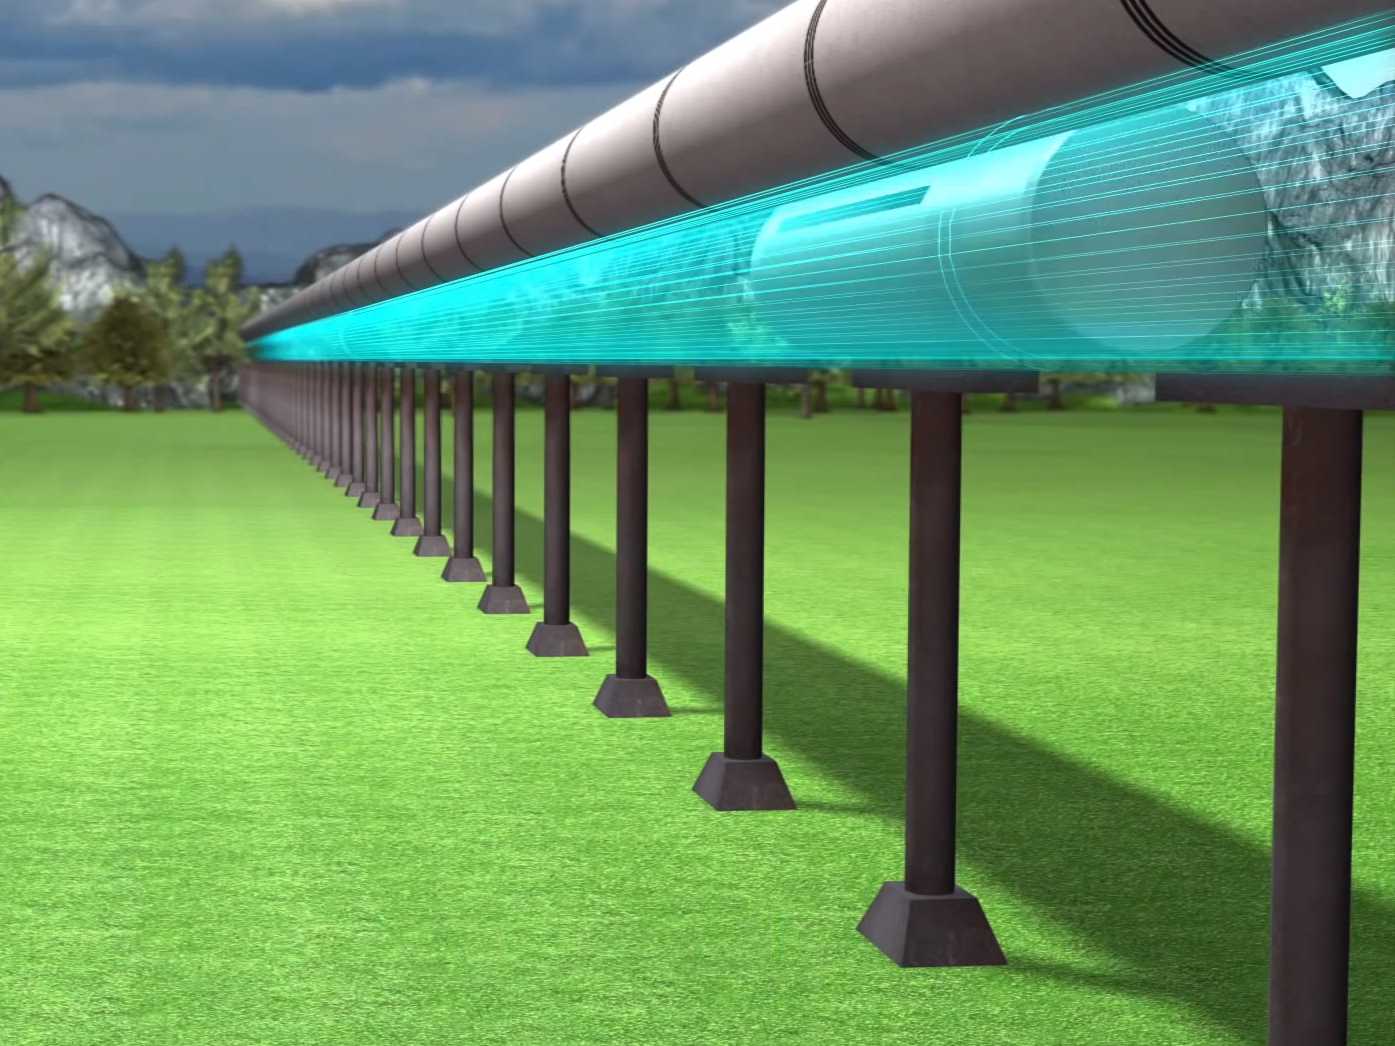 elon-musks-dream-is-coming-true-vacuum-tube-company-is-building-a-3-mile-hyperloop-like-transport-system